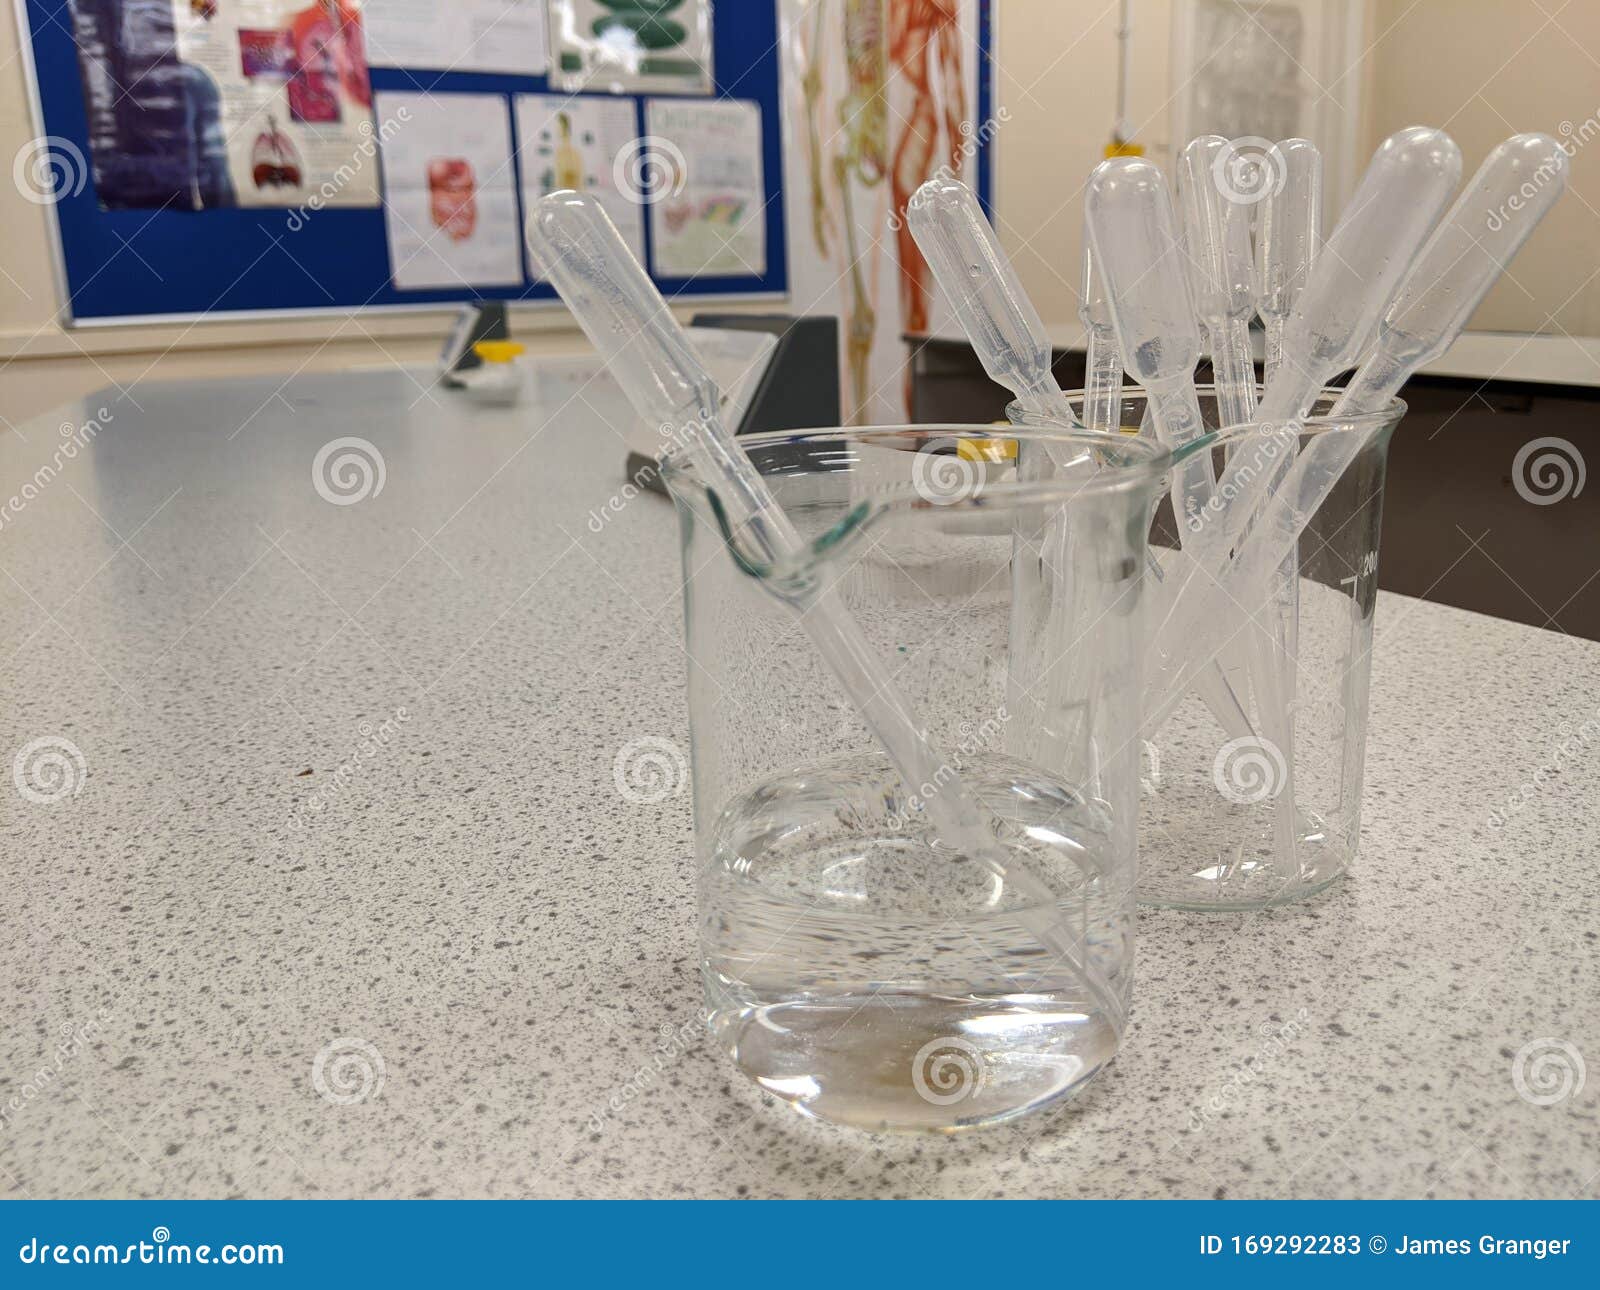 plastic science pipettes stored in 2 glass beakers